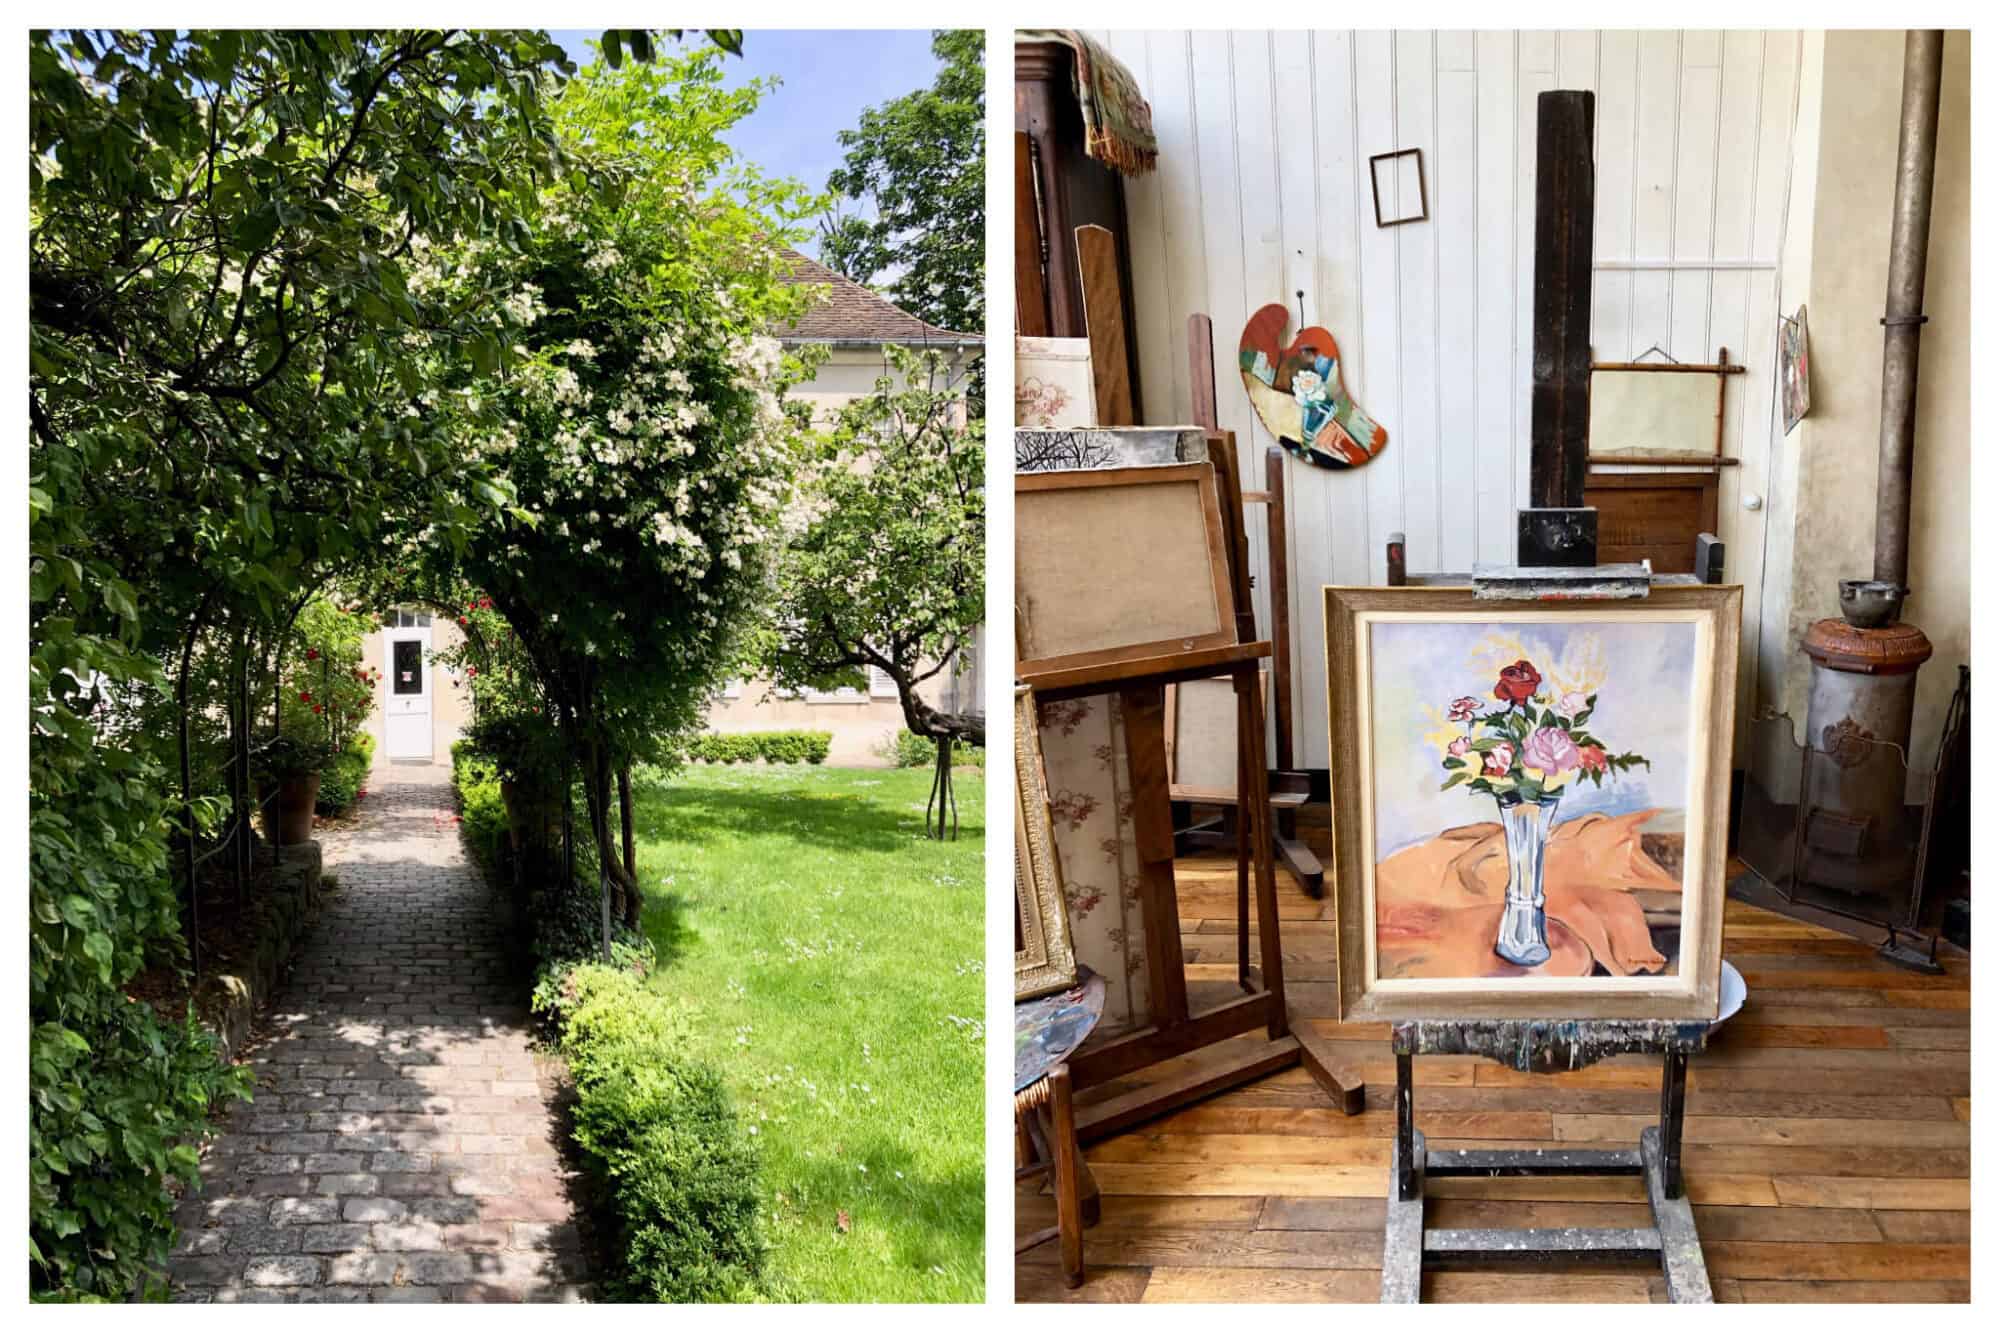 Left, the garden of the Musée Montmartre in Paris, featuring the oldest house in the area. Right, a painting of flowers in a vase inside the atelier of Suzanne Valadon at the museum.